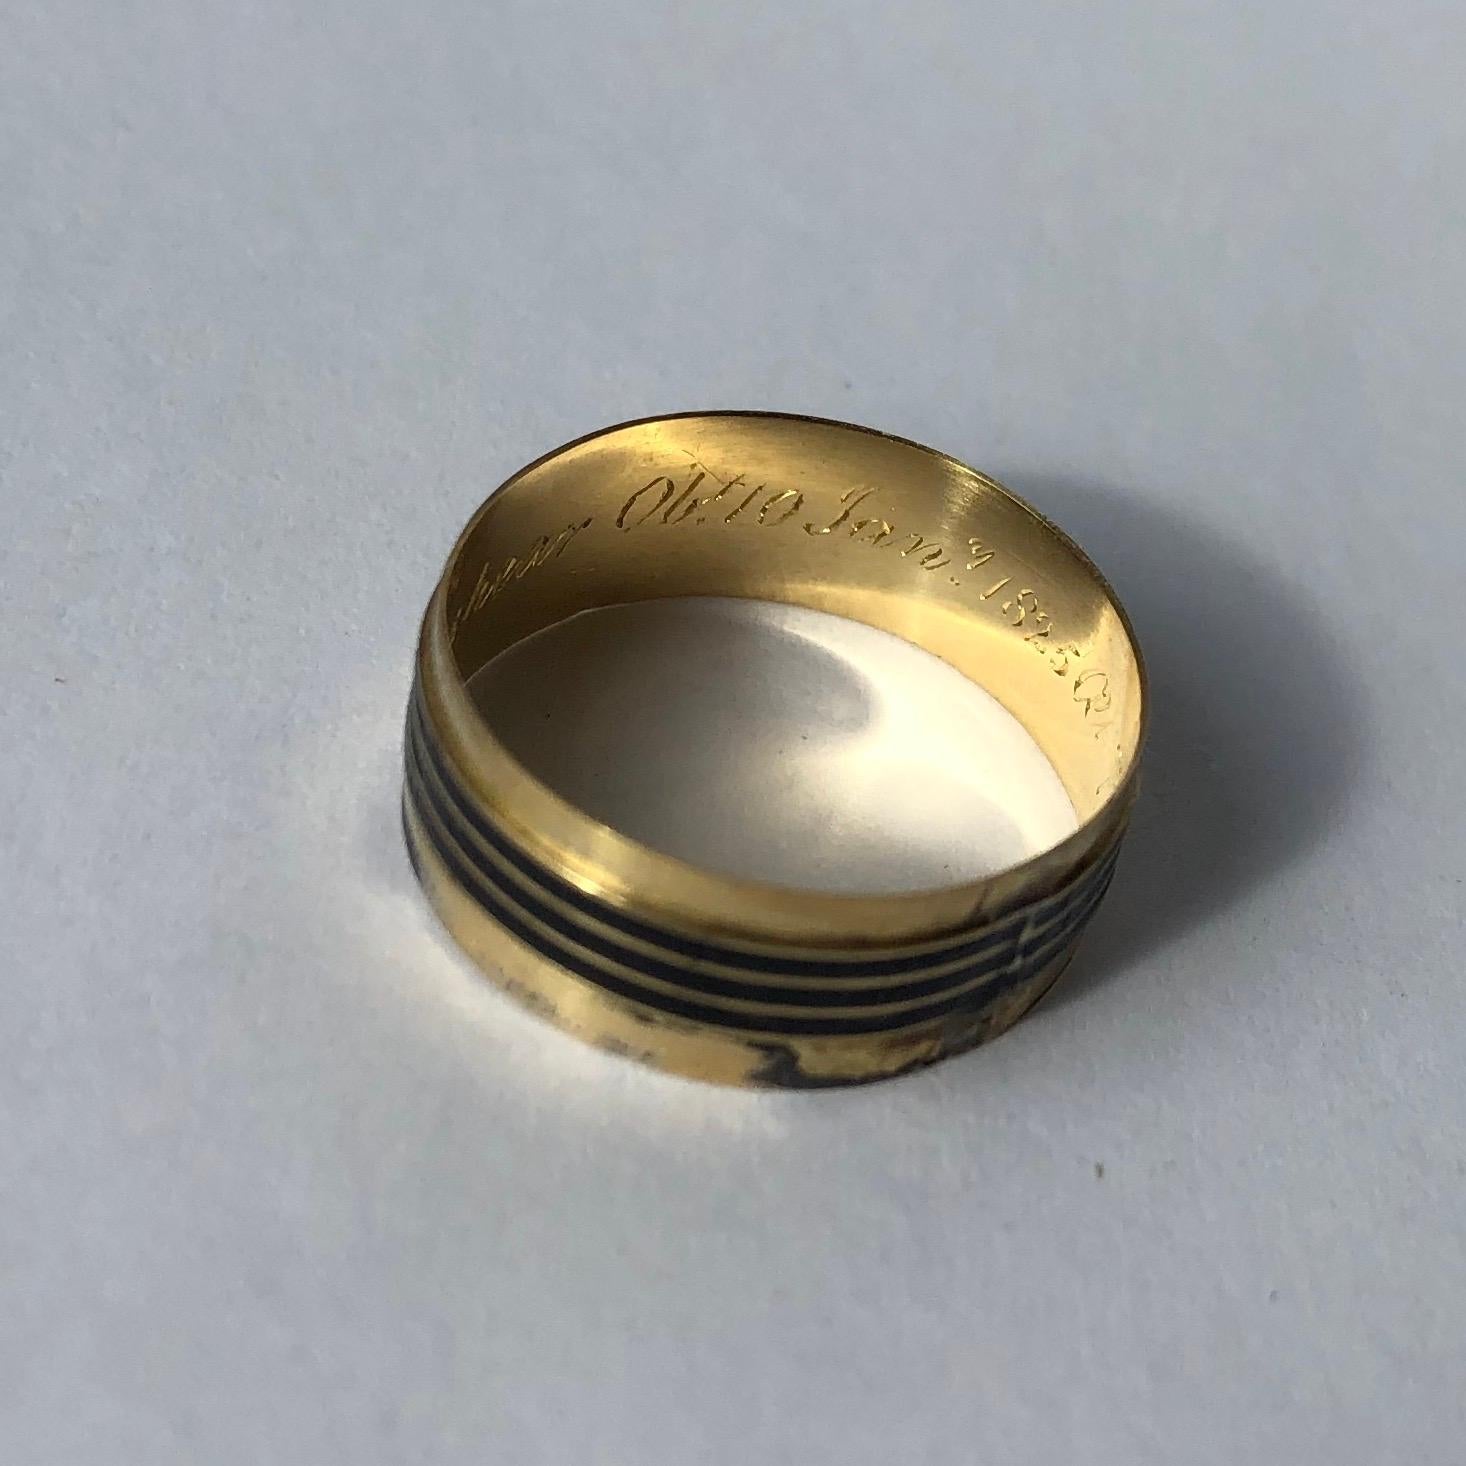 A very fine Georgian mourning ring. This gold band has another band with black enamel banding. On the inside of the band there is an inscription reading 'John Shakespeare Ob10 Jan 1825 at 75'. Made in London, England. 

Ring Size: M 1/2 or 6 1/2